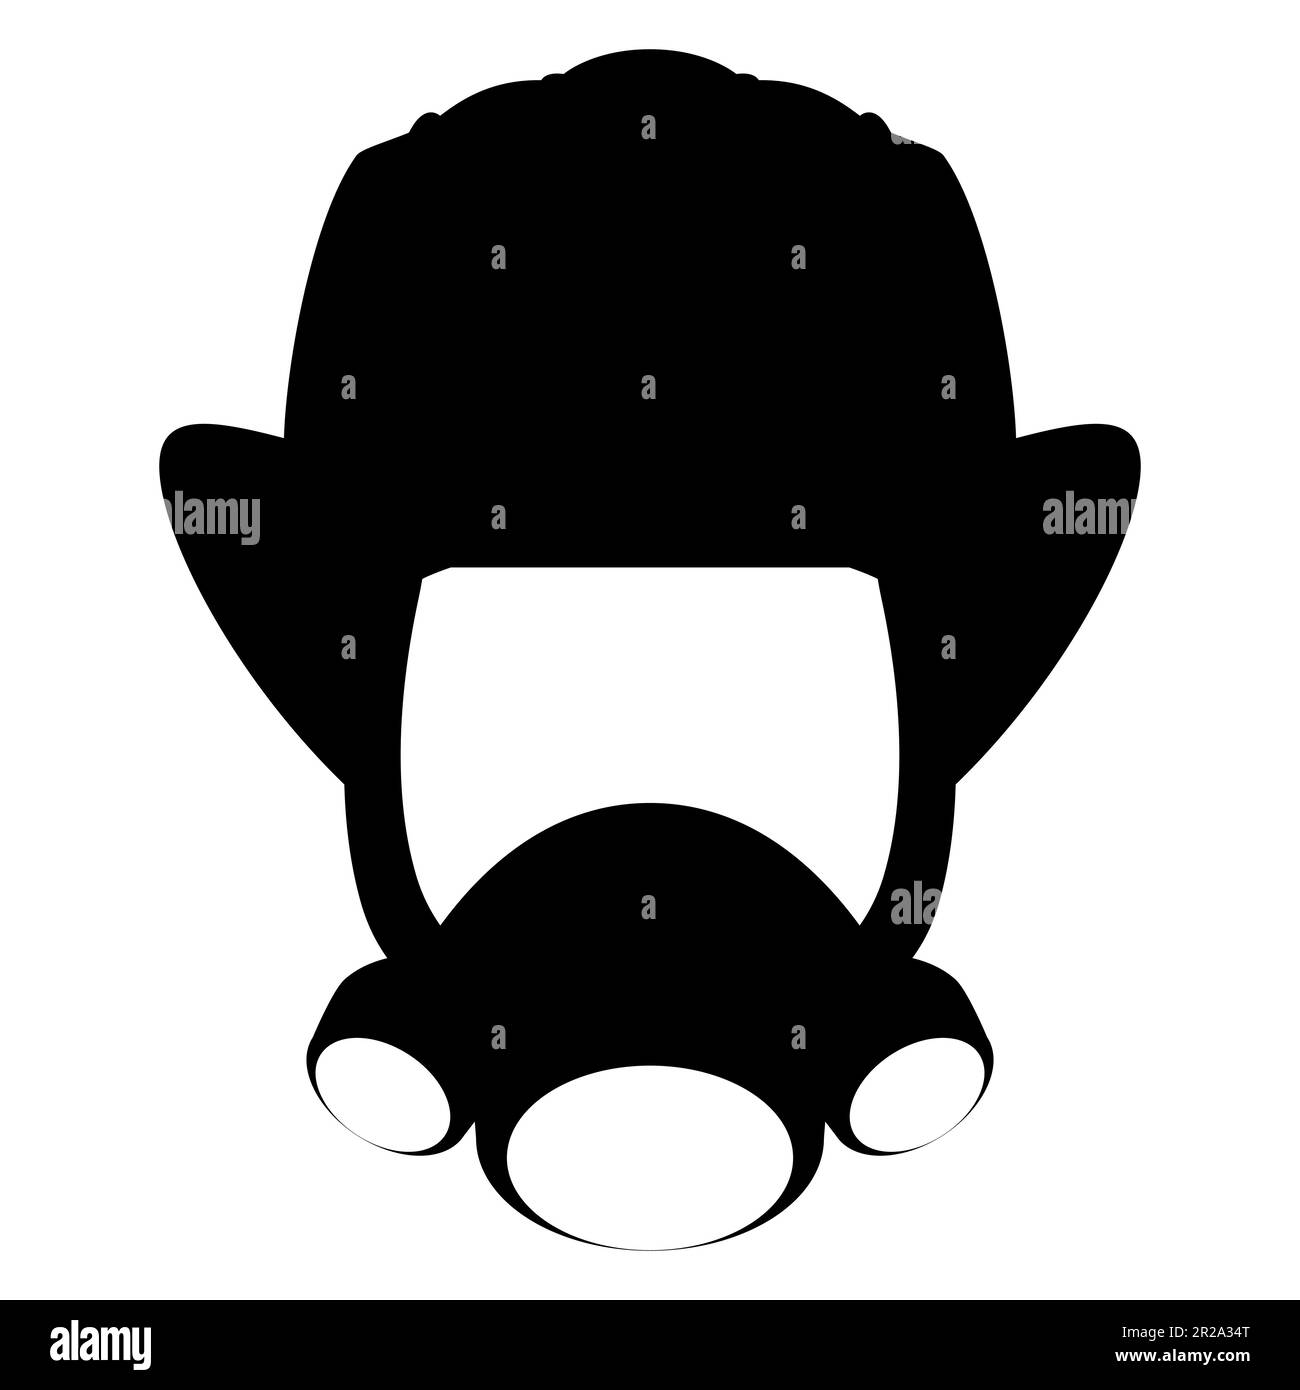 Firefighter Mask silhouette. Helmet of a firefighter. Colorful vector illustration on a white background. Stock Vector